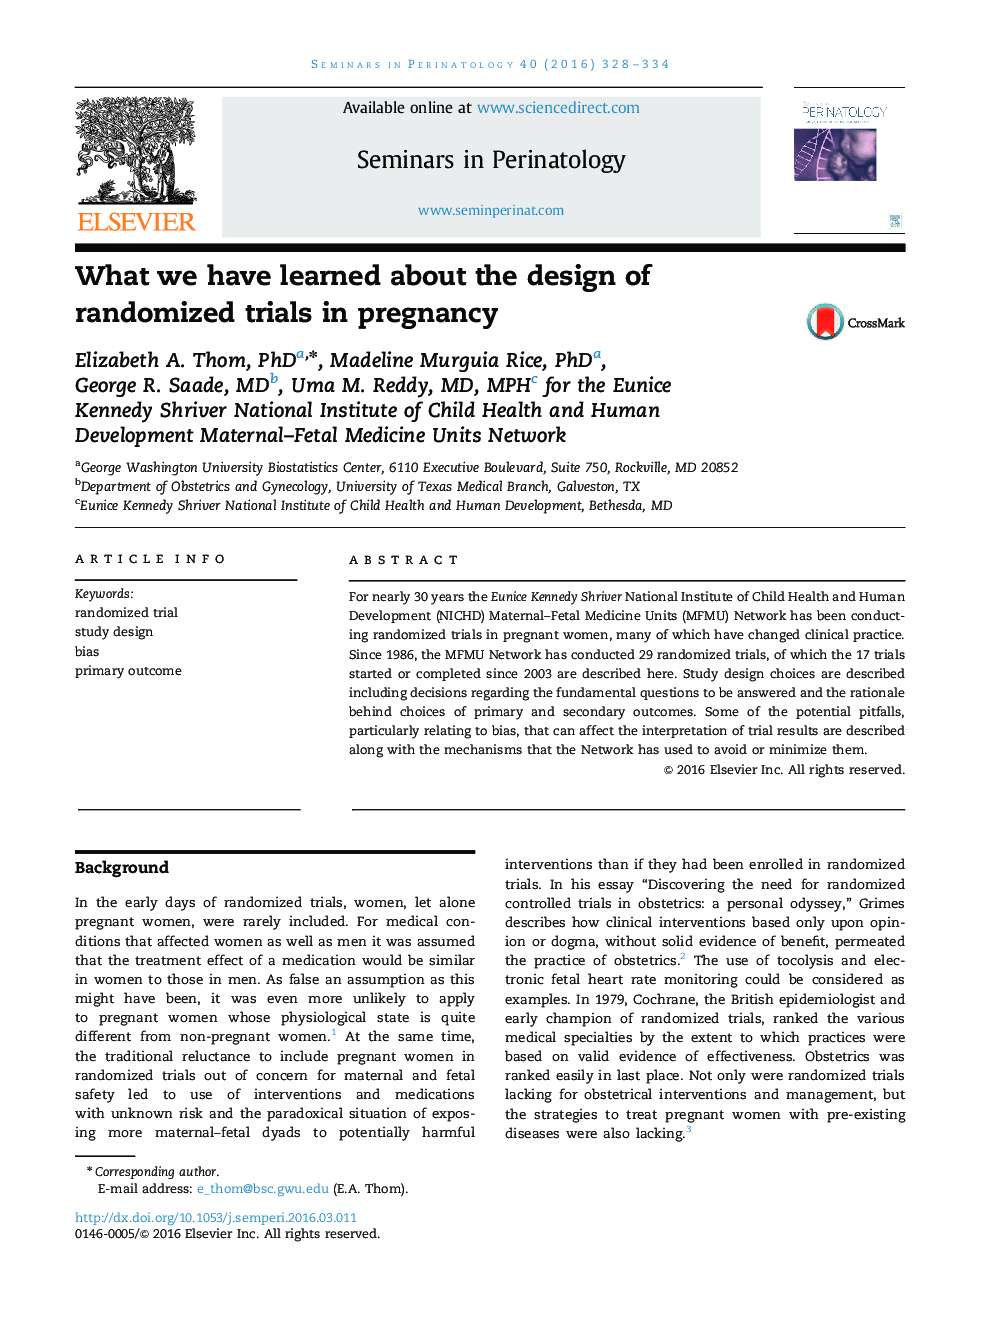 What we have learned about the design of randomized trials in pregnancy